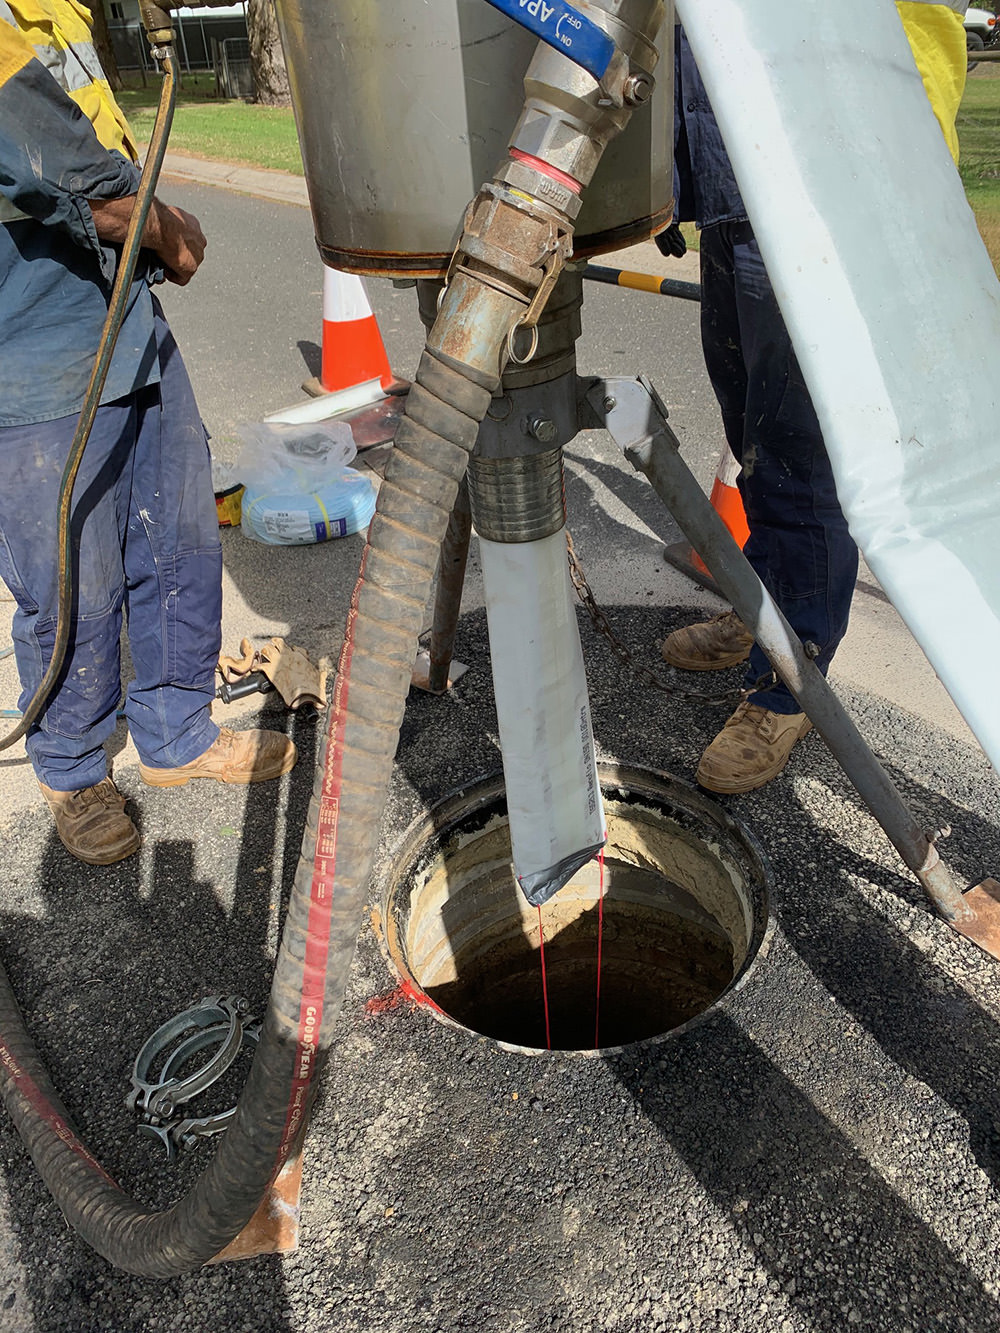 Trenchless Pipe Relining